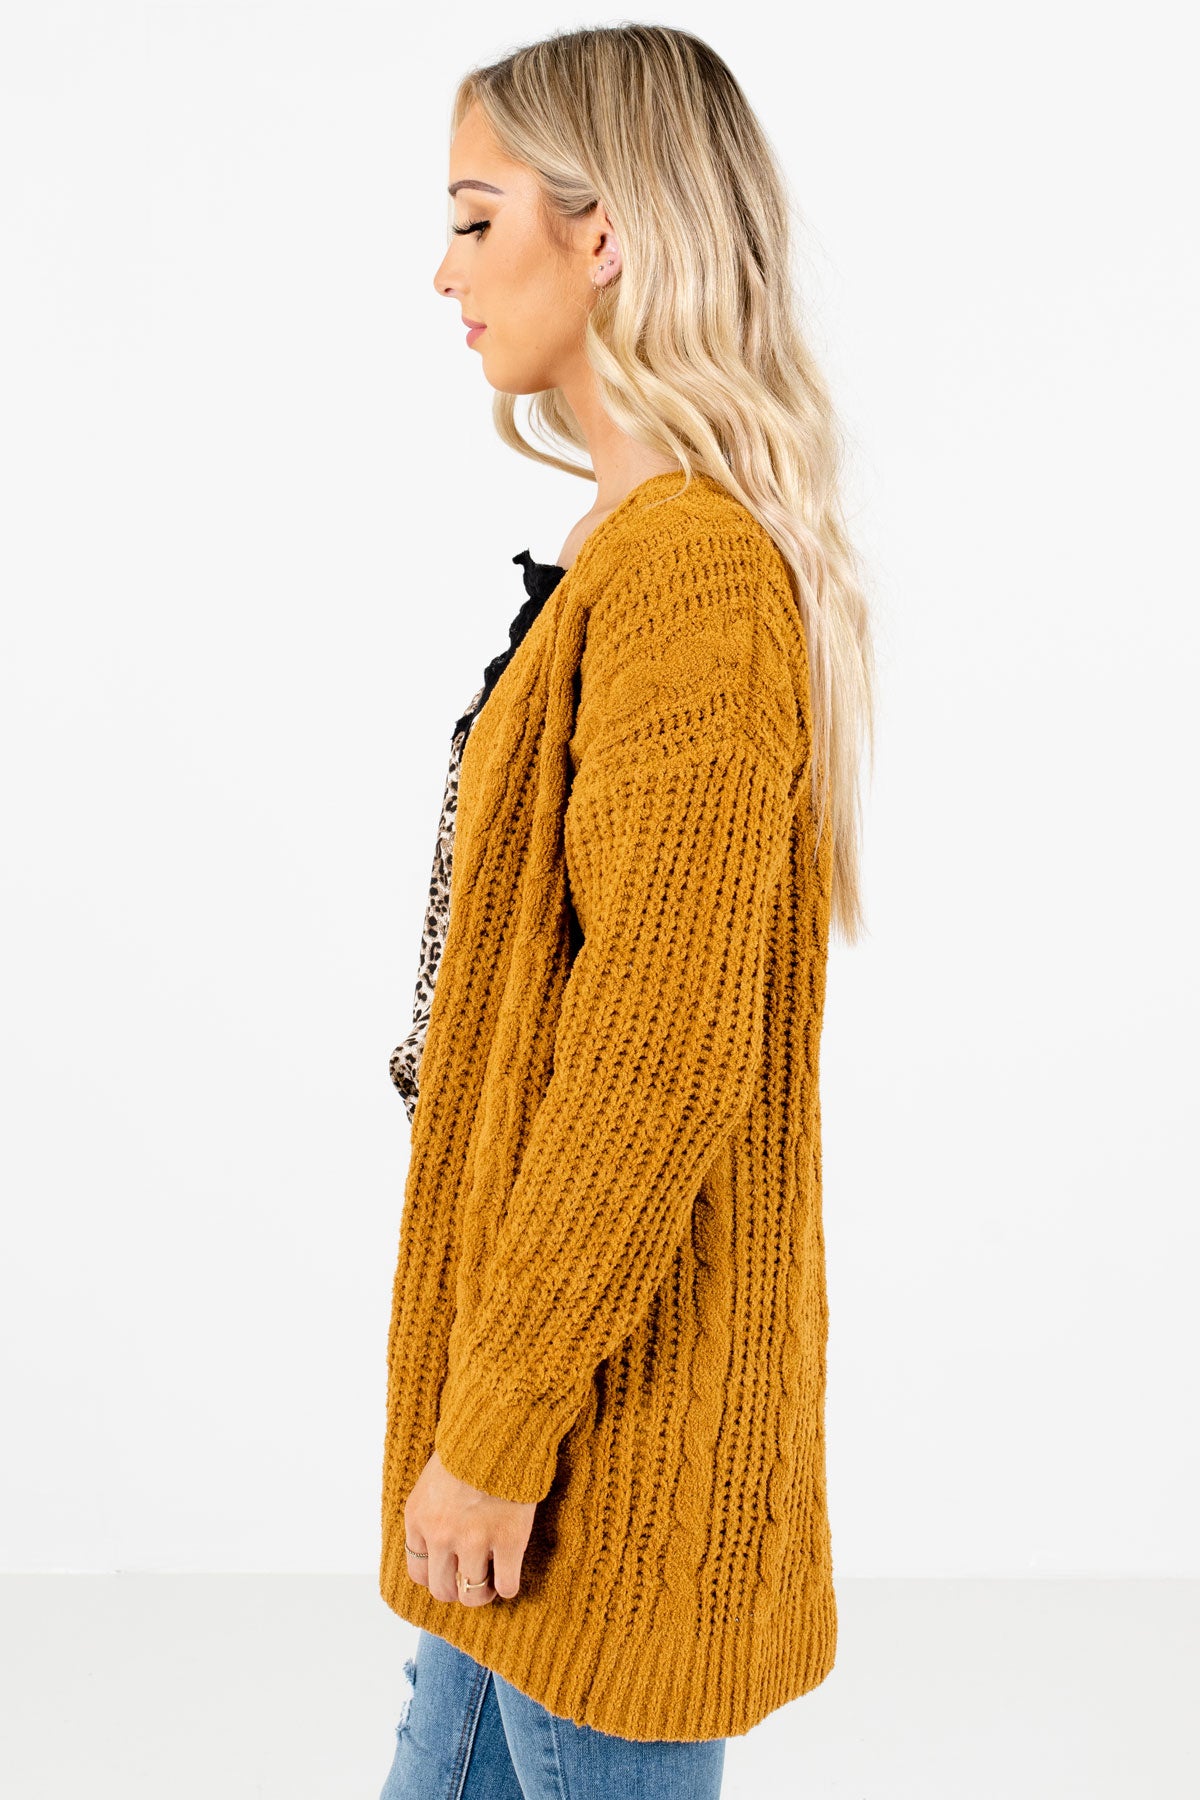 Mustard Yellow Long Sleeve Boutique Cardigans for Women